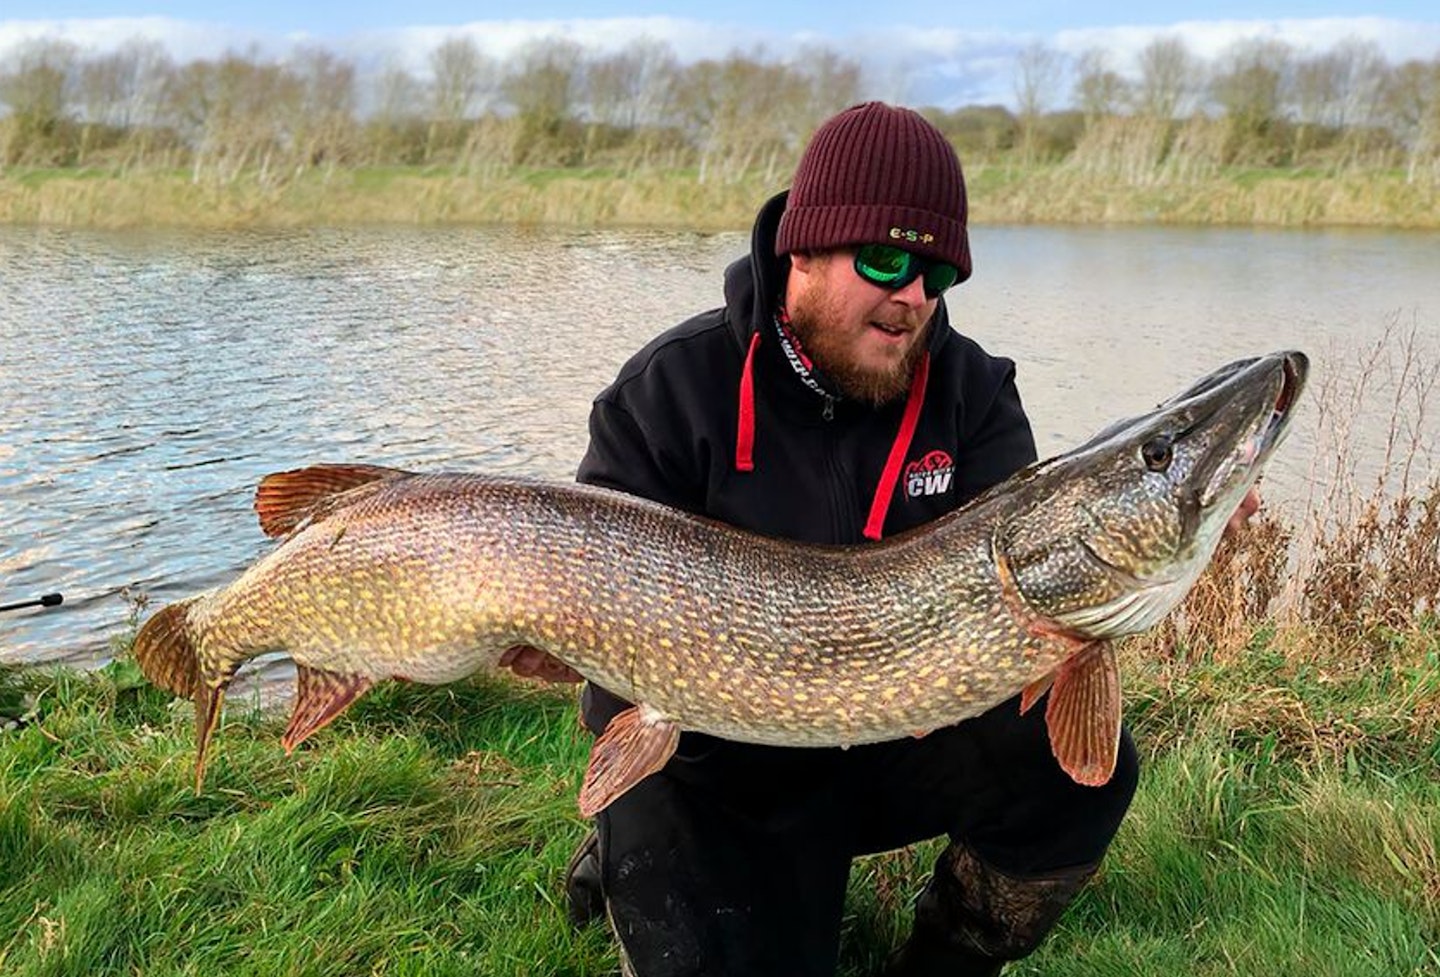 Predator angler Dan Hill laid claim to the largest UK pike to fall to a lure